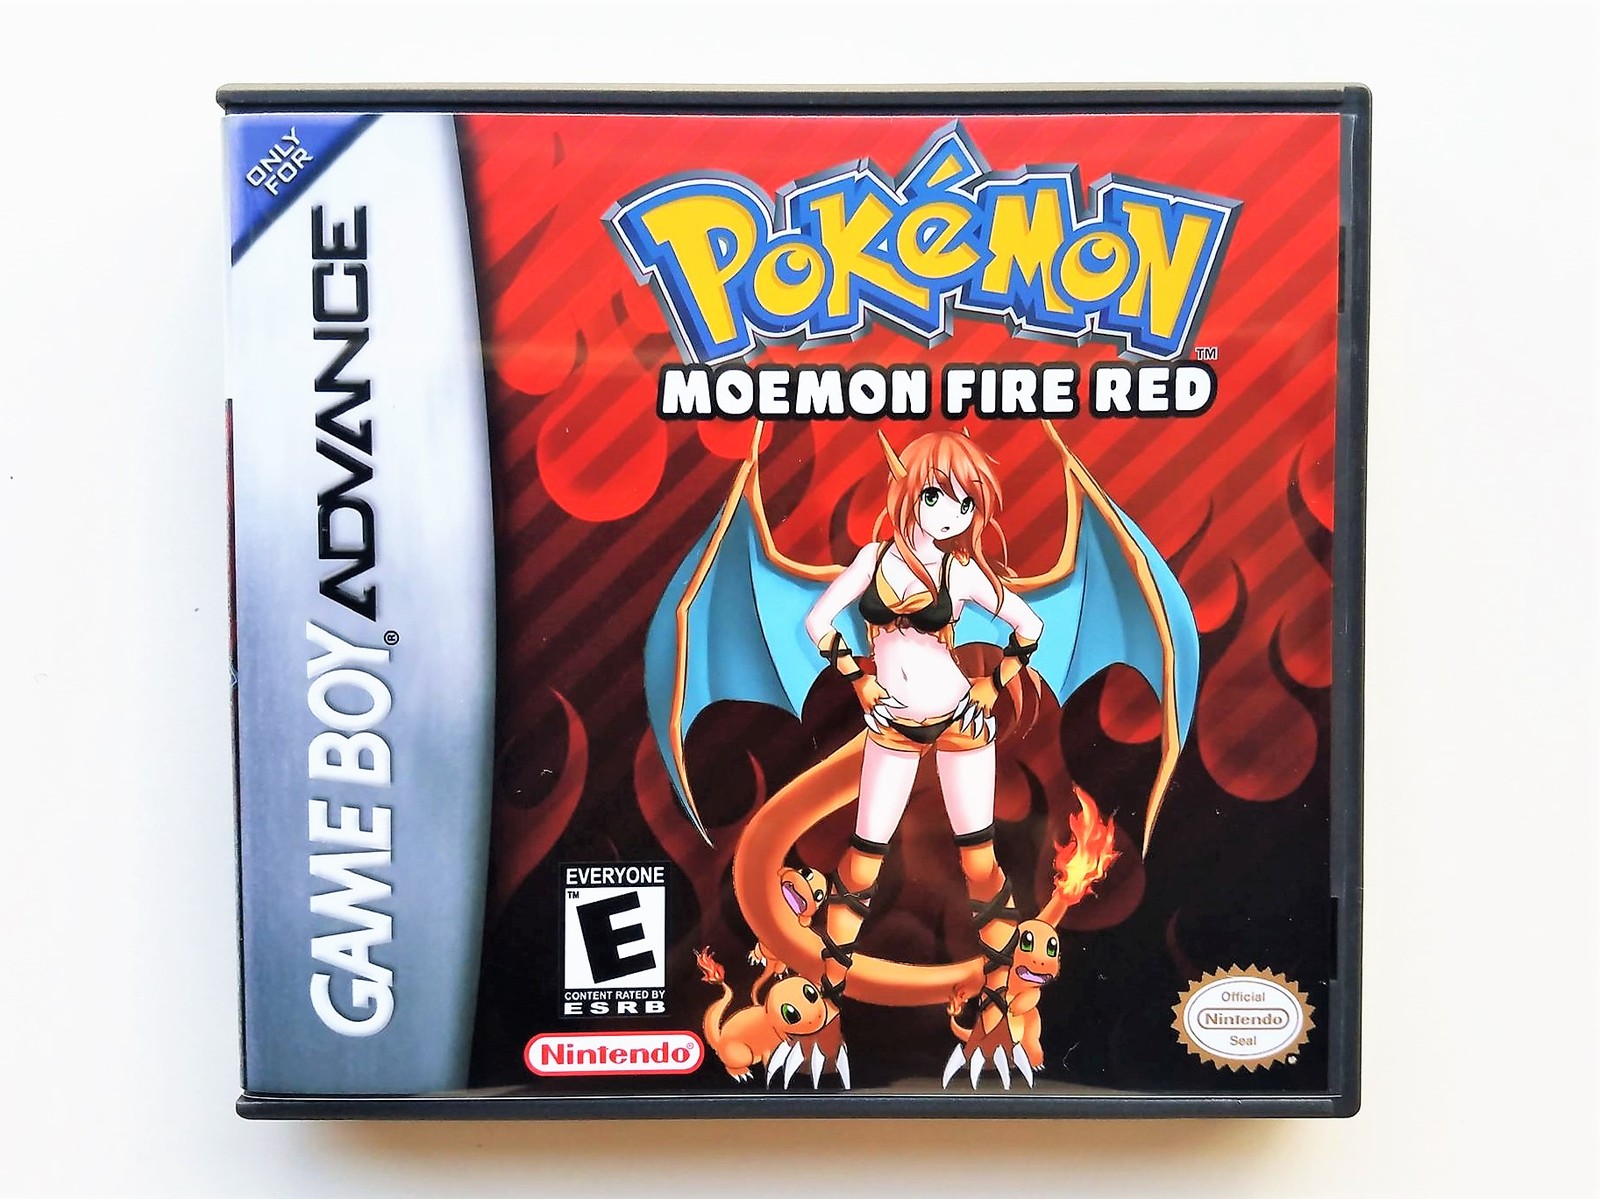 Primary image for Pokemon Moemon Fire Red Game / Case - Gameboy Advance (GBA) USA Seller